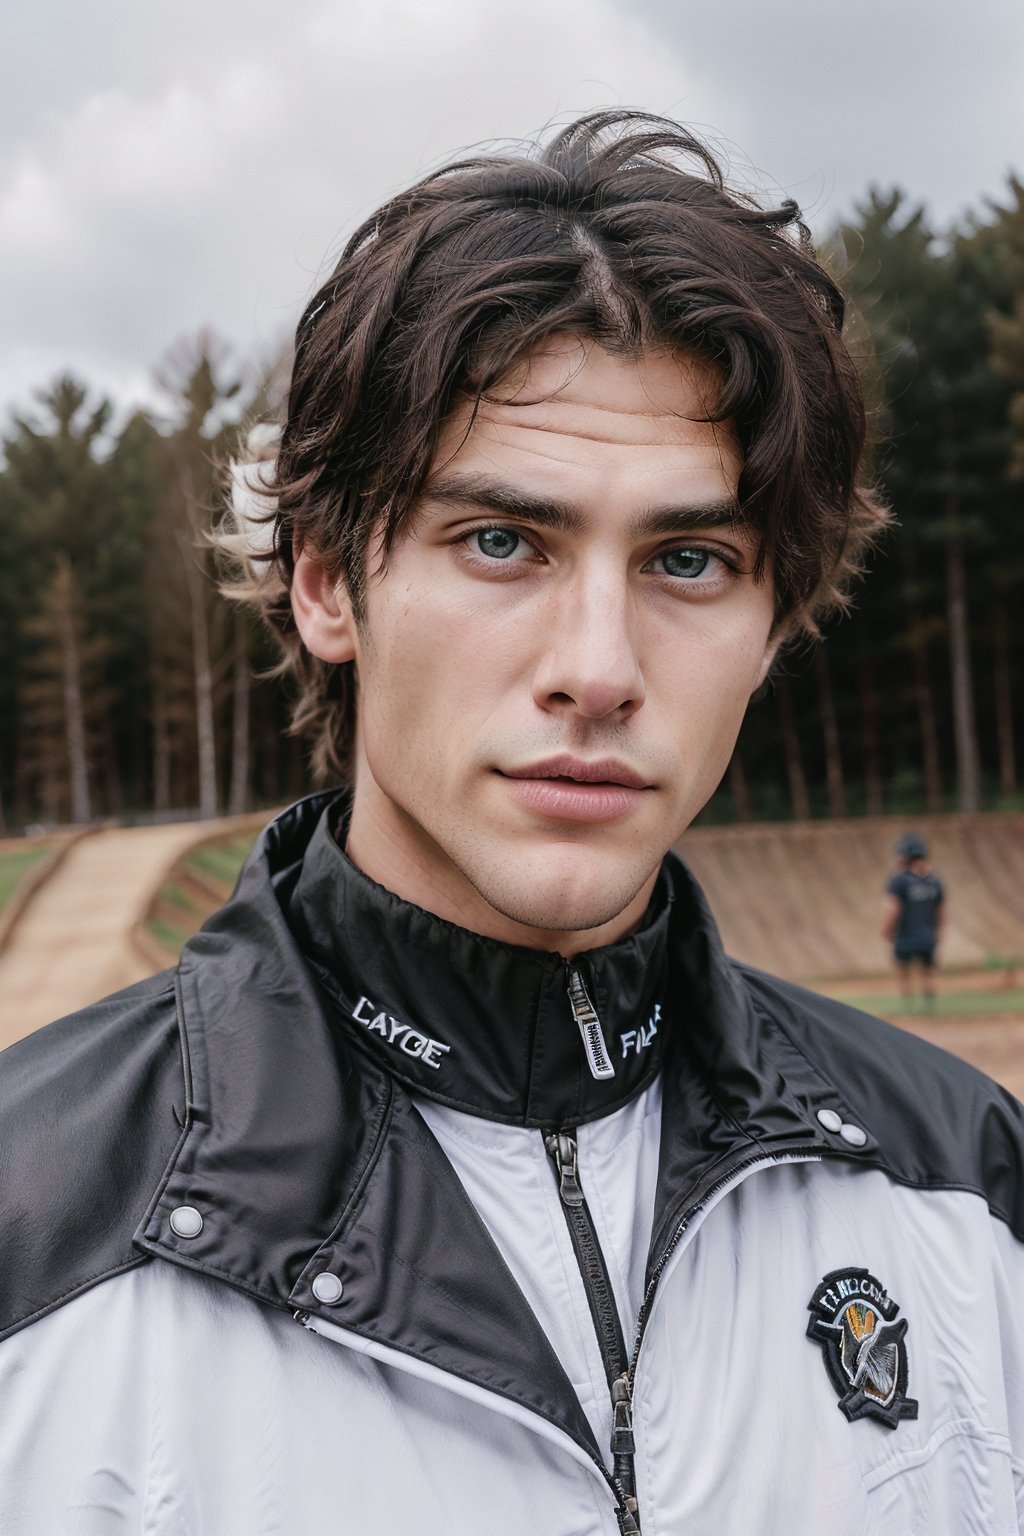 Hyper realistic image of an athletic looking Caucasian man dressed biker white uniform. ((The uniform white Fox Racing Sports whit Logos: 1.2)). The character should have detailed skin texture, well-defined hands, and hazel eyes that reflect realism. His face should show symmetry in his physical features, and he should have a serious but friendly expression. When standing, the lighting in the scene should be natural and realistic, with a medium shot that shows the character centered in the frame, (looking directly at the viewer: 1.2). ((Also, make sure his entire body is facing the viewer to create a sense of connection: 1.6)).
(Change biker uniform color: 1.8)
(Fund of a BMX track: 1.6)